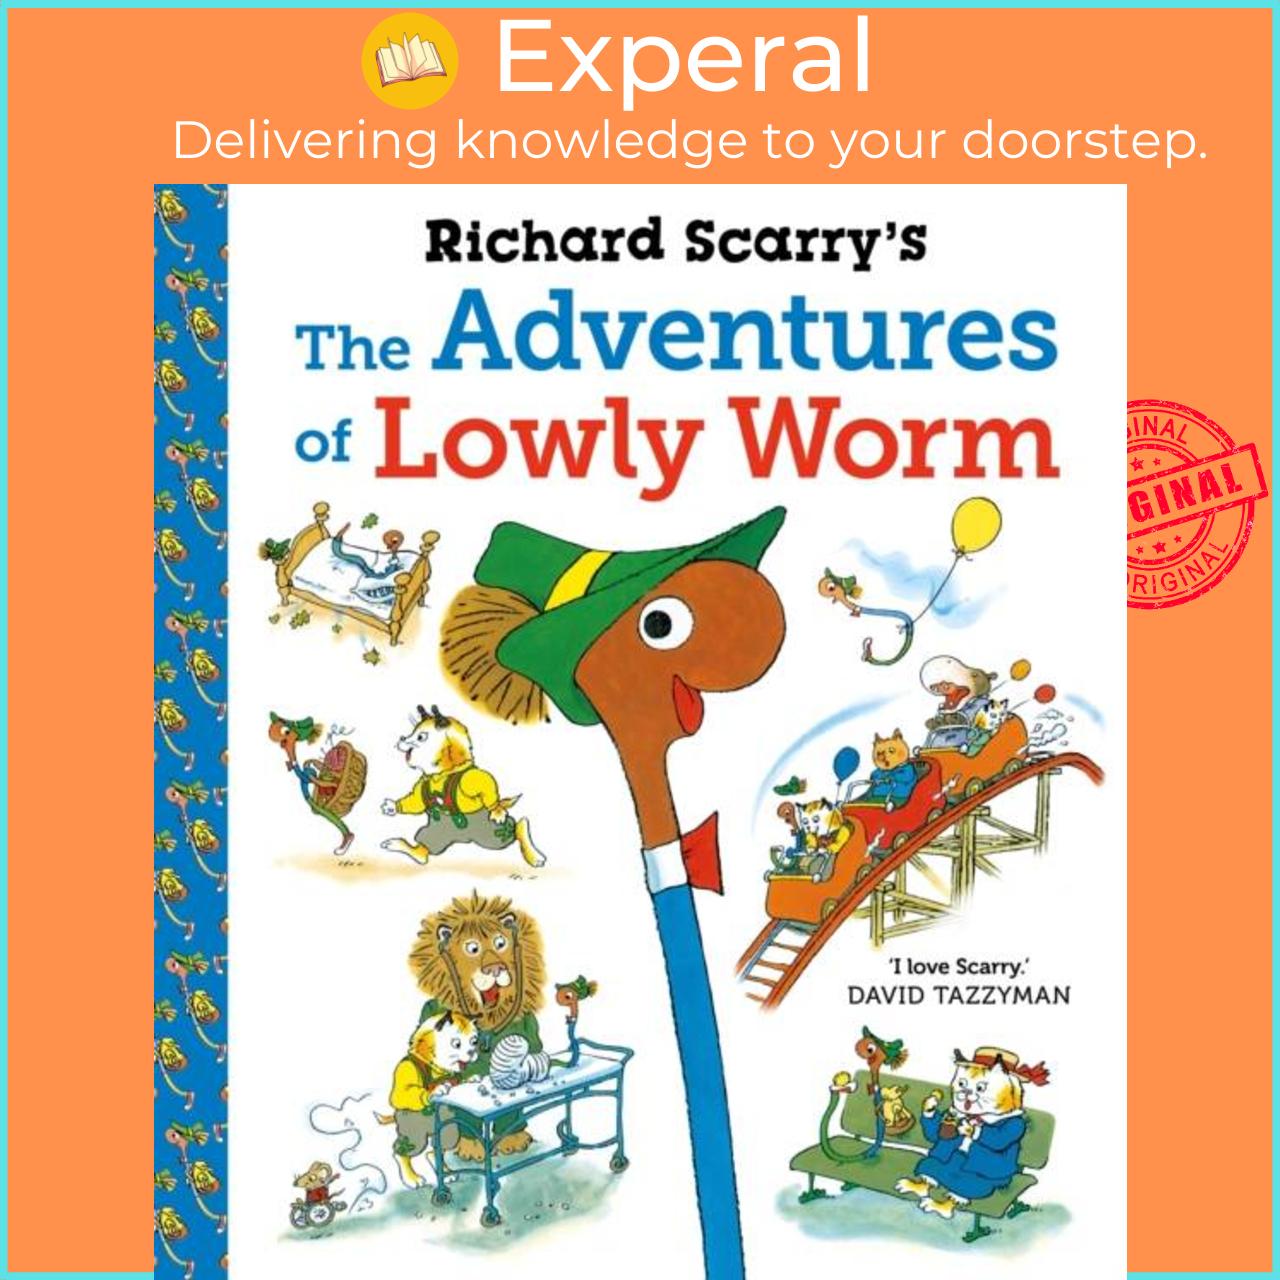 Sách - Richard Scarry's The Adventures of Lowly Worm by Richard Scarry (UK edition, paperback)